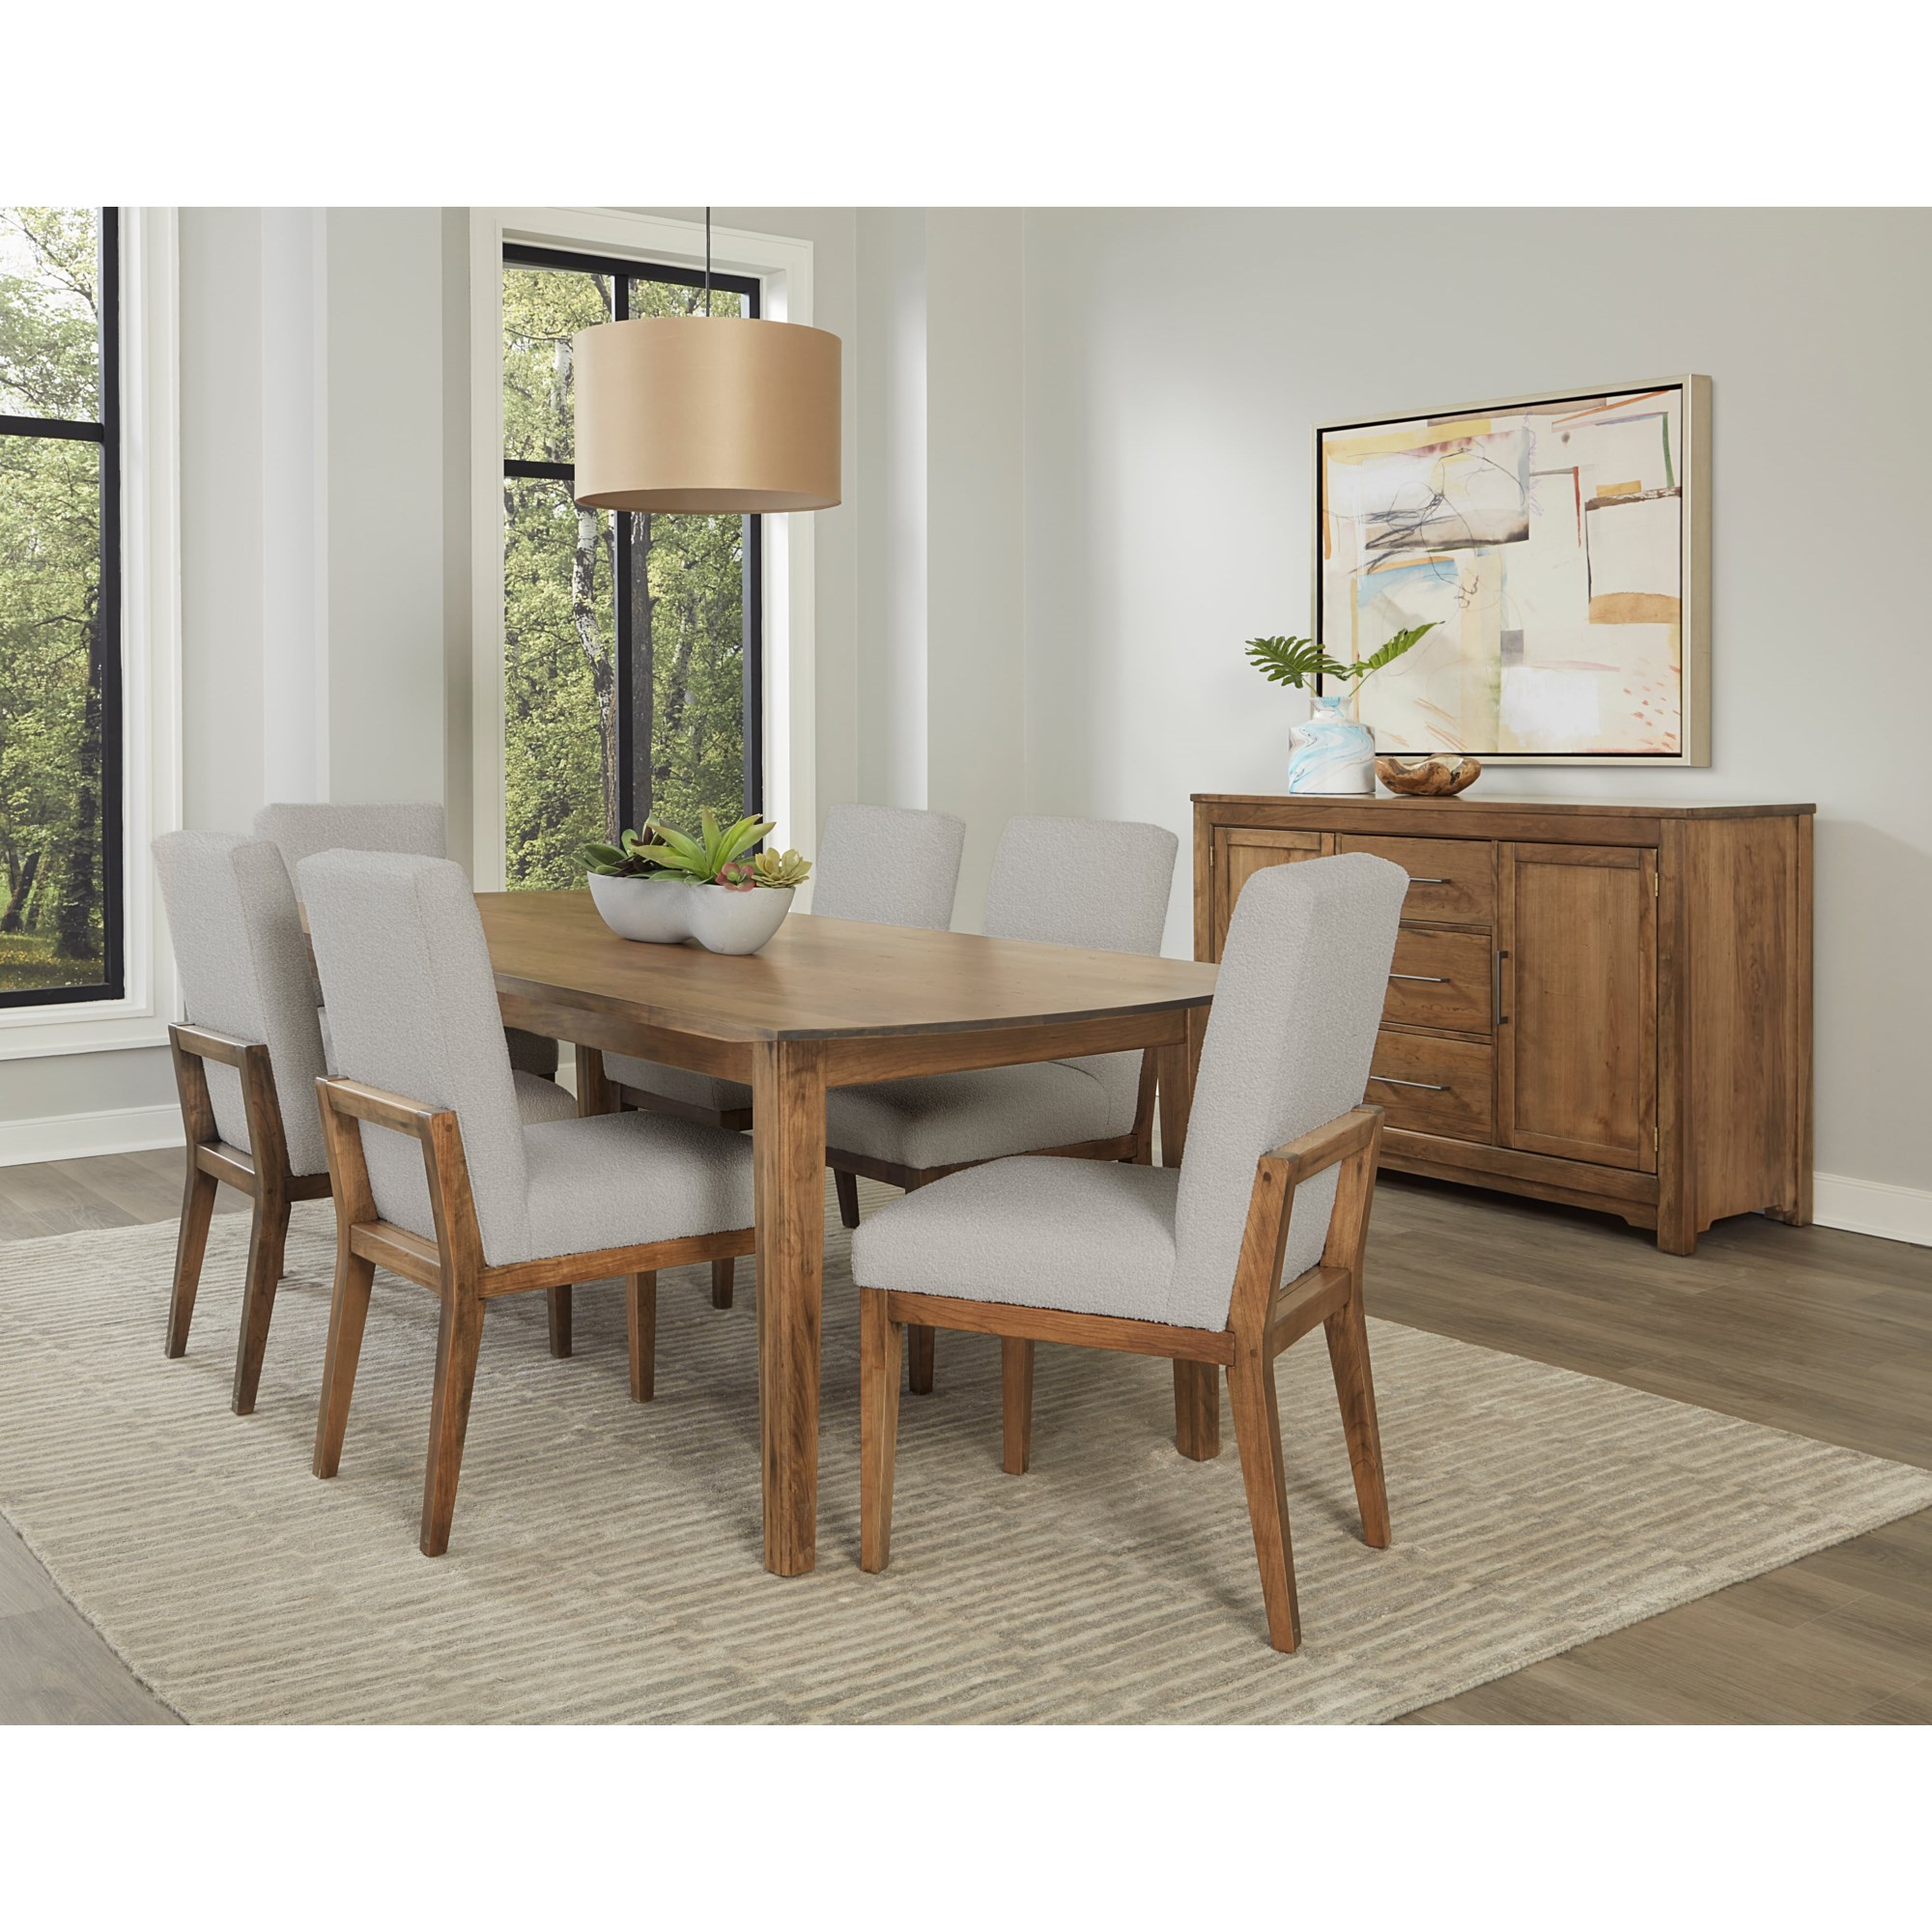 Contemporary Medium Dining Side Cherry Upholstered | Bassett Chair - Side Dining | Furniture Brown Vaughan Crafted Chairs 151-030B - Squirrel Chair